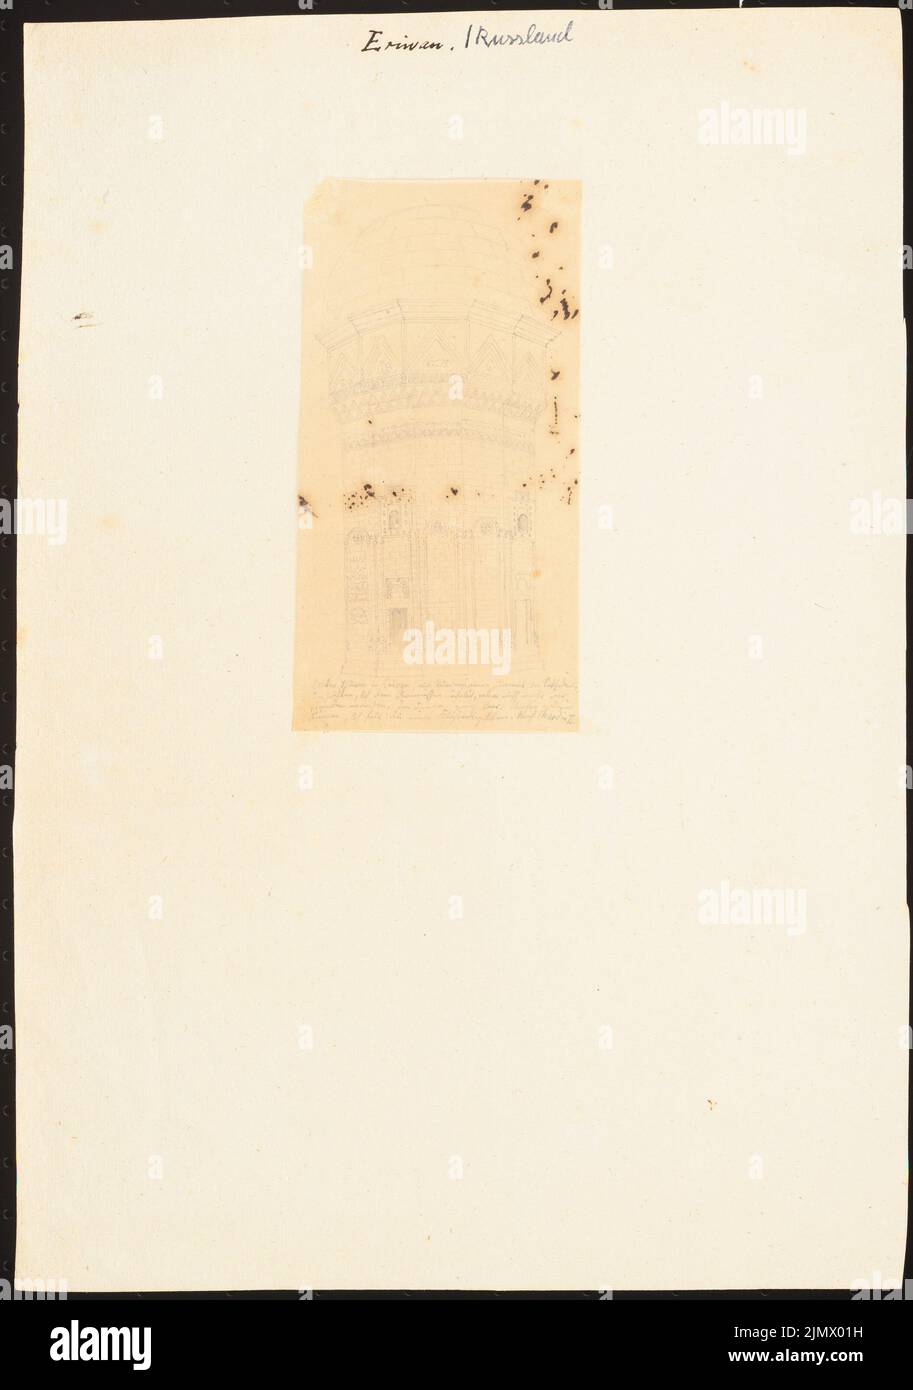 Quast Ferdinand von (1807-1877), old coupling tower in Eriwan (without dat.): Perpective view of the terrace, according to Chardin II (Jean Chardin: Voyages du Chevalier Chardin?). Pencil on transparent, 35.2 x 24.7 cm (including scan edges) Quast Ferdinand von  (1807-1877): Alter Kuppelturm, Eriwan Stock Photo